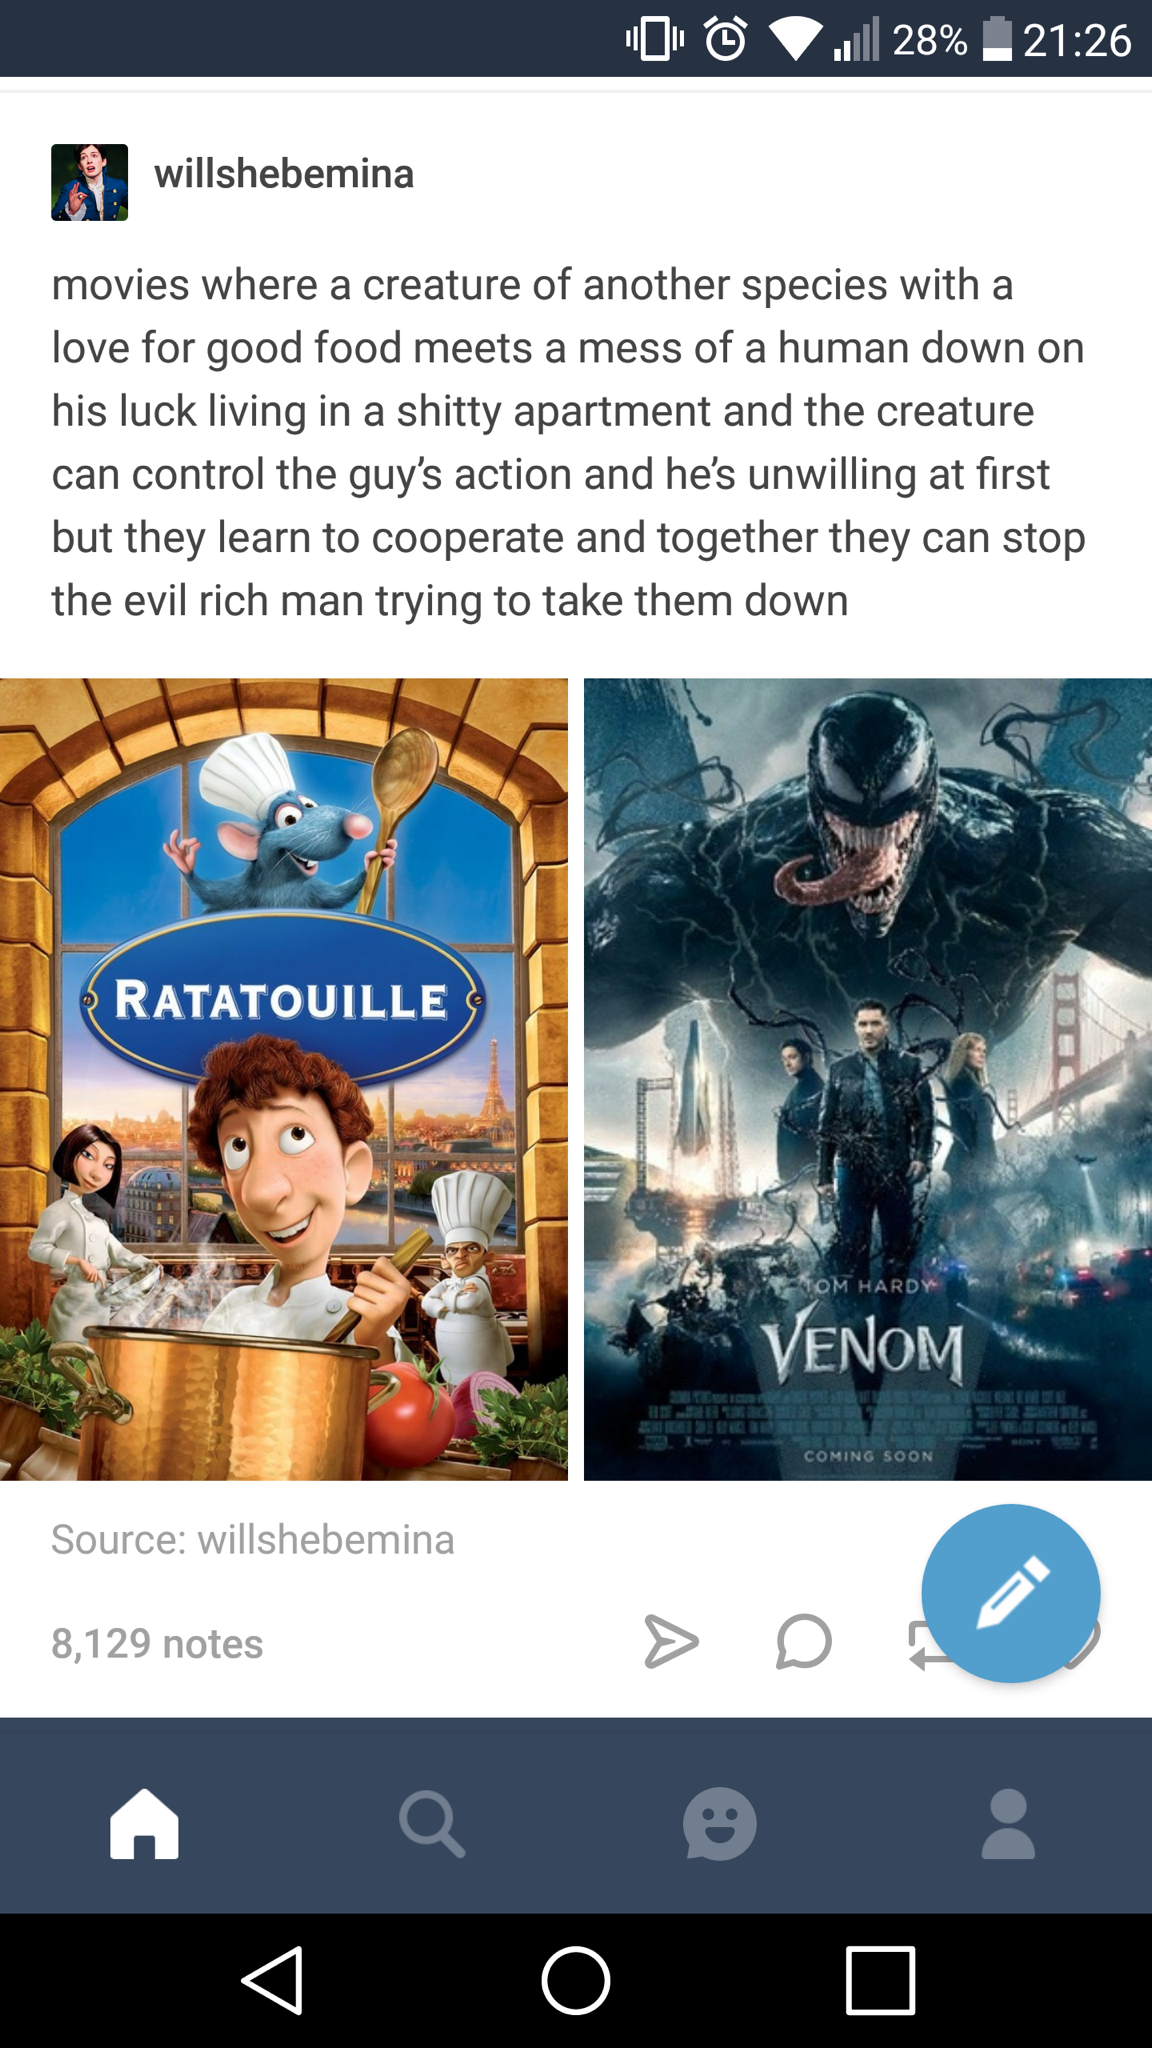 dank meme about venom and ratatouille - 00 .28% willshebemina movies where a creature of another species with a love for good food meets a mess of a human down on his luck living in a shitty apartment and the creature can control the guy's action and he's